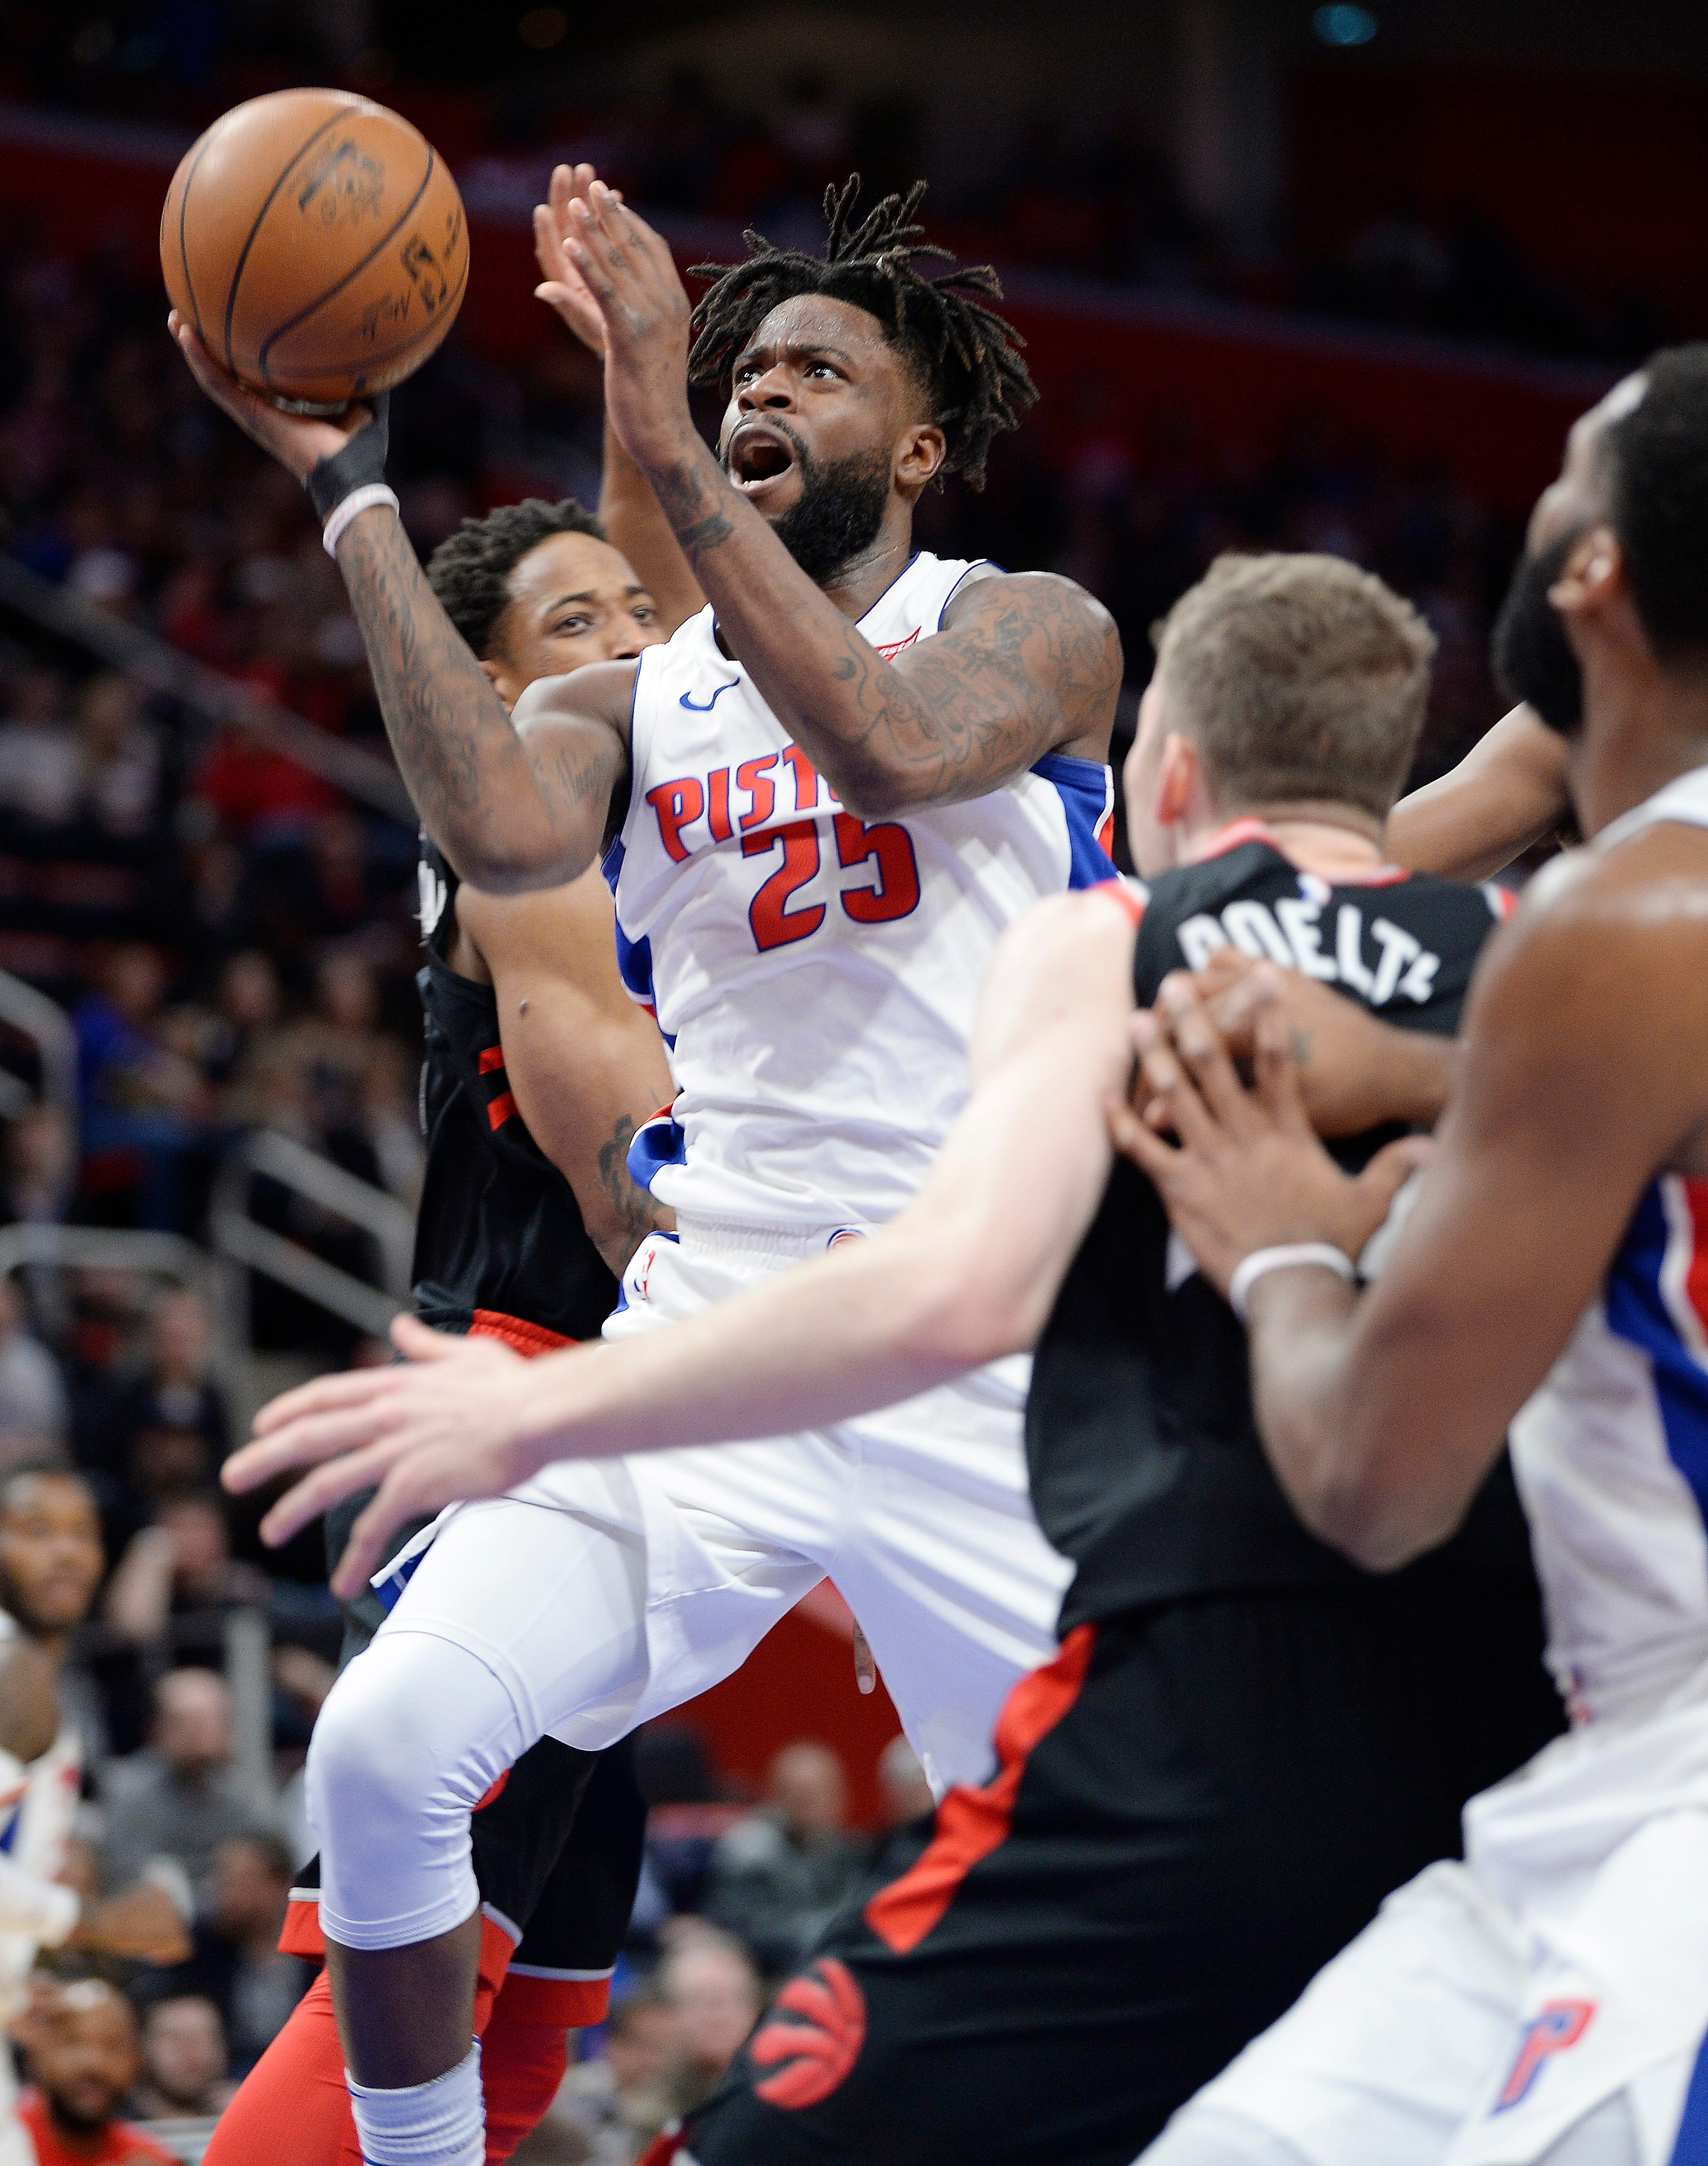 4. Reggie Bullock, G/F: Former coach and team president Stan Van Gundy made a shrewd move in keeping Bullock on a minimal contract of $2.5 million and it’s paying off in the Pistons' cash-strapped situation. He’s a steady wing who doesn’t make many mistakes on either side of the ball and his 3-point shooting (45 percent) was among the best in the league. He should start, but eventually Luke Kennard will be groomed for this spot.